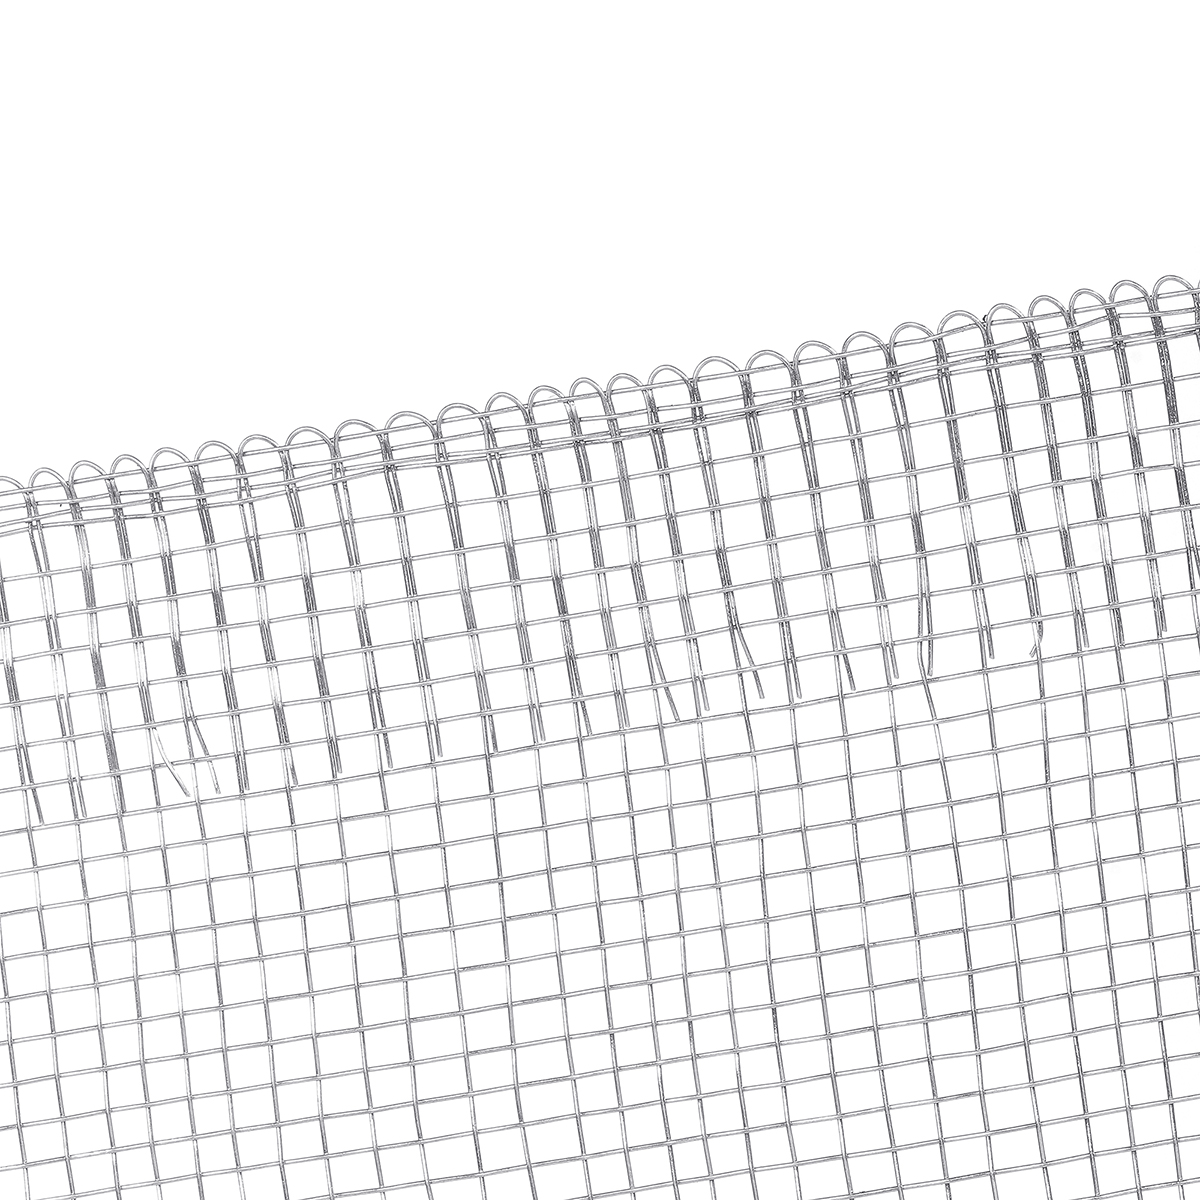 Hardware-Cloth-24in-x50ft--18inch-Chicken-Wire-Mesh-Hot-Dipped-Galvanized-Material-Fence-Wire-Mesh-f-1679475-9